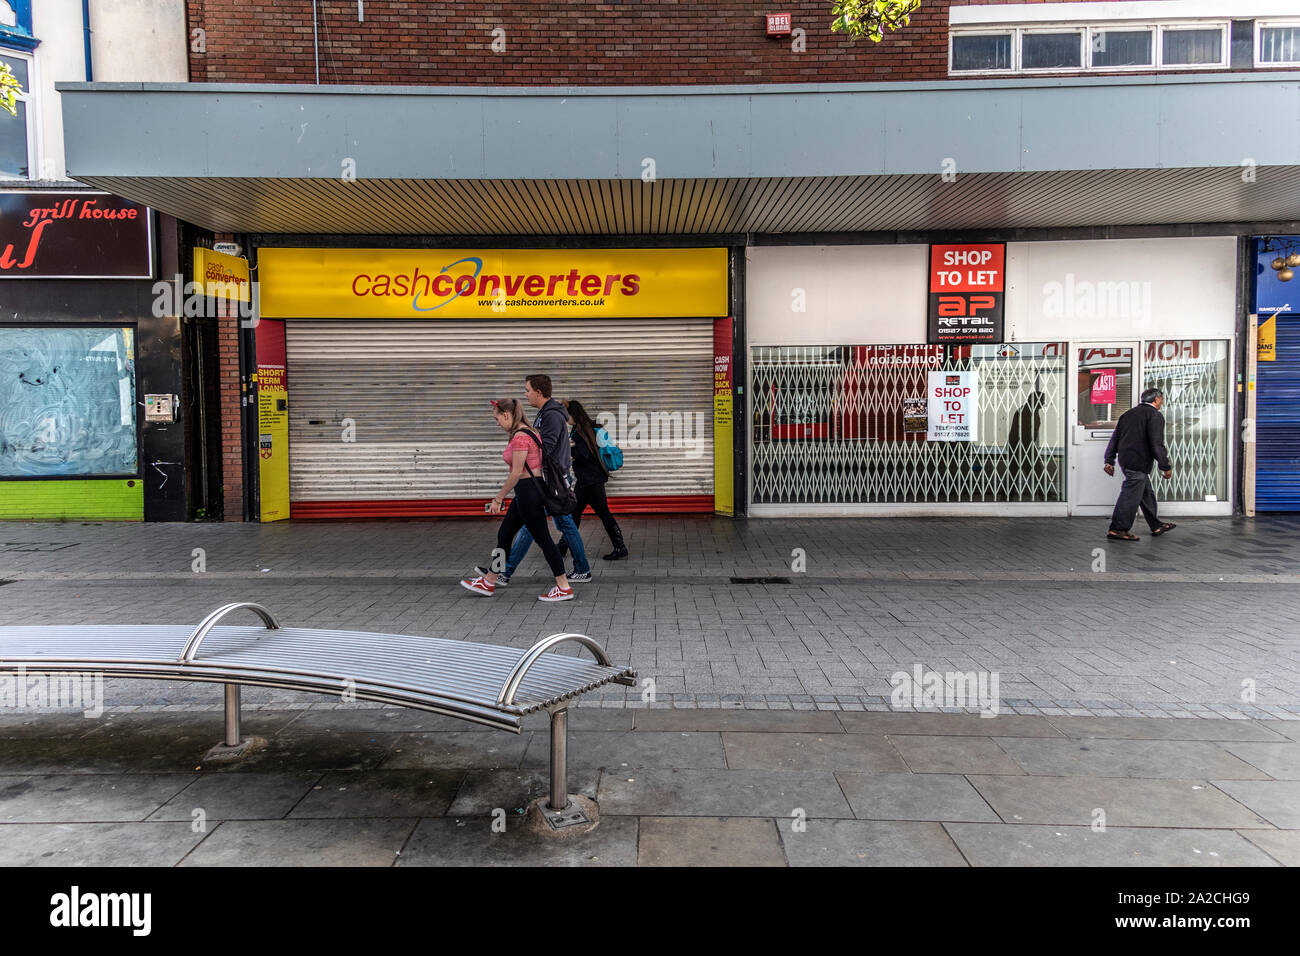 Closed shops on the High Street, Cash converters, West Bromwich, West Midlands, UK. Stock Photo